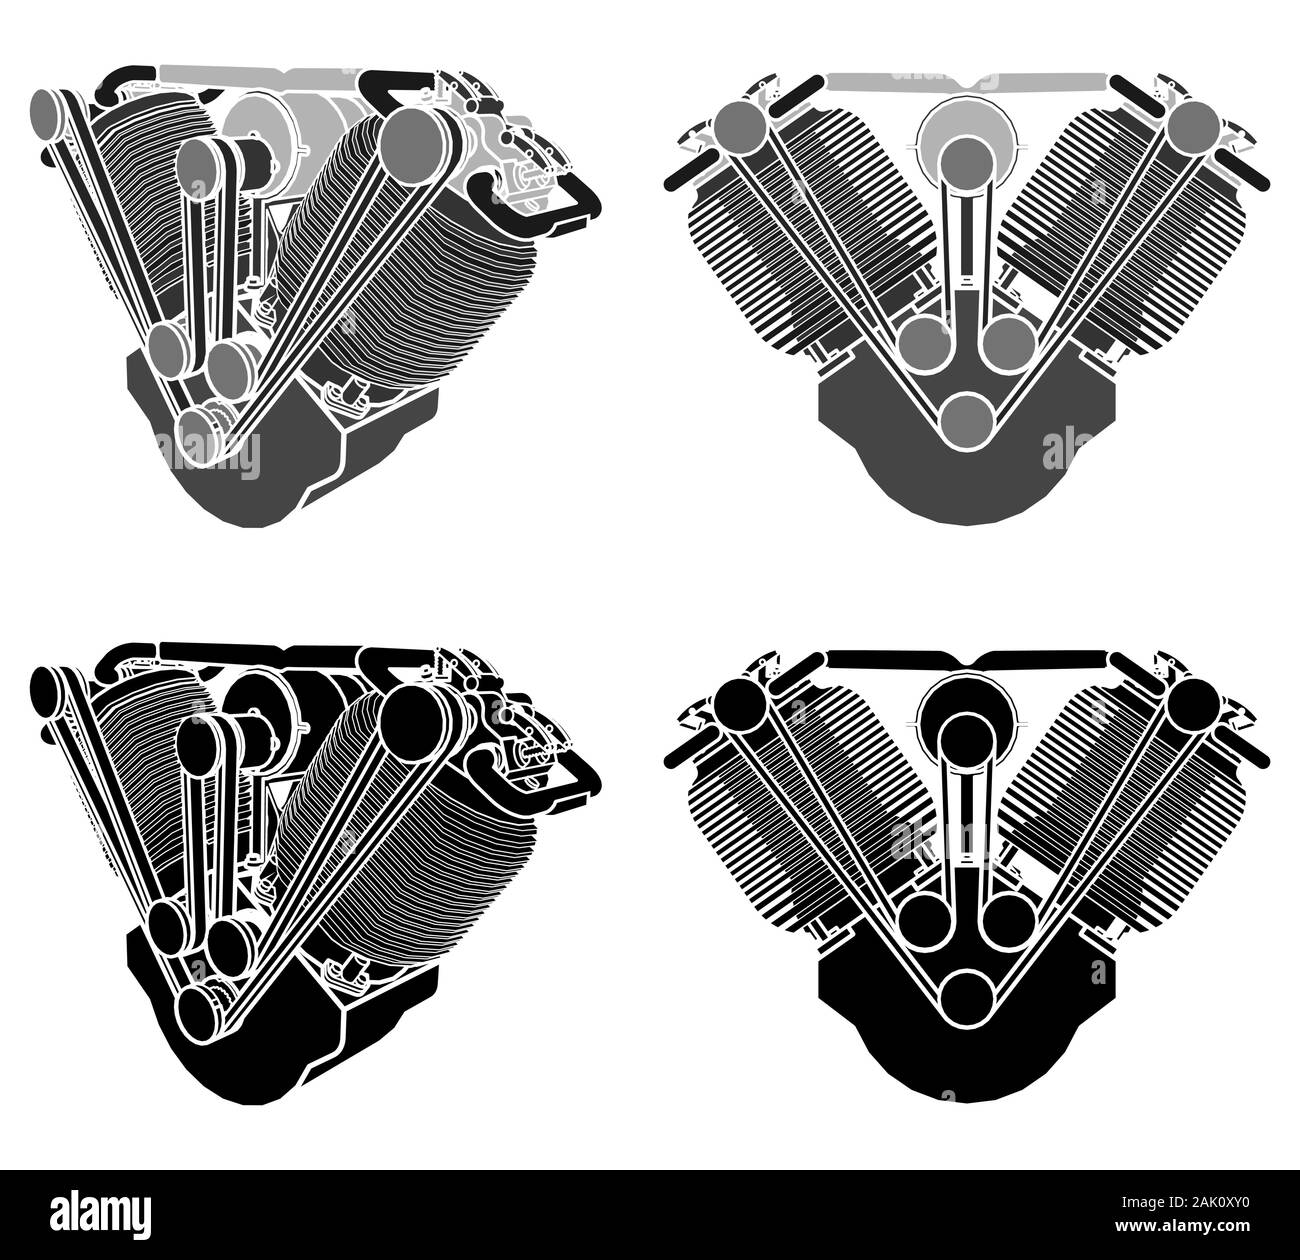 Engine V twin colored. Perspective view. Stock Vector